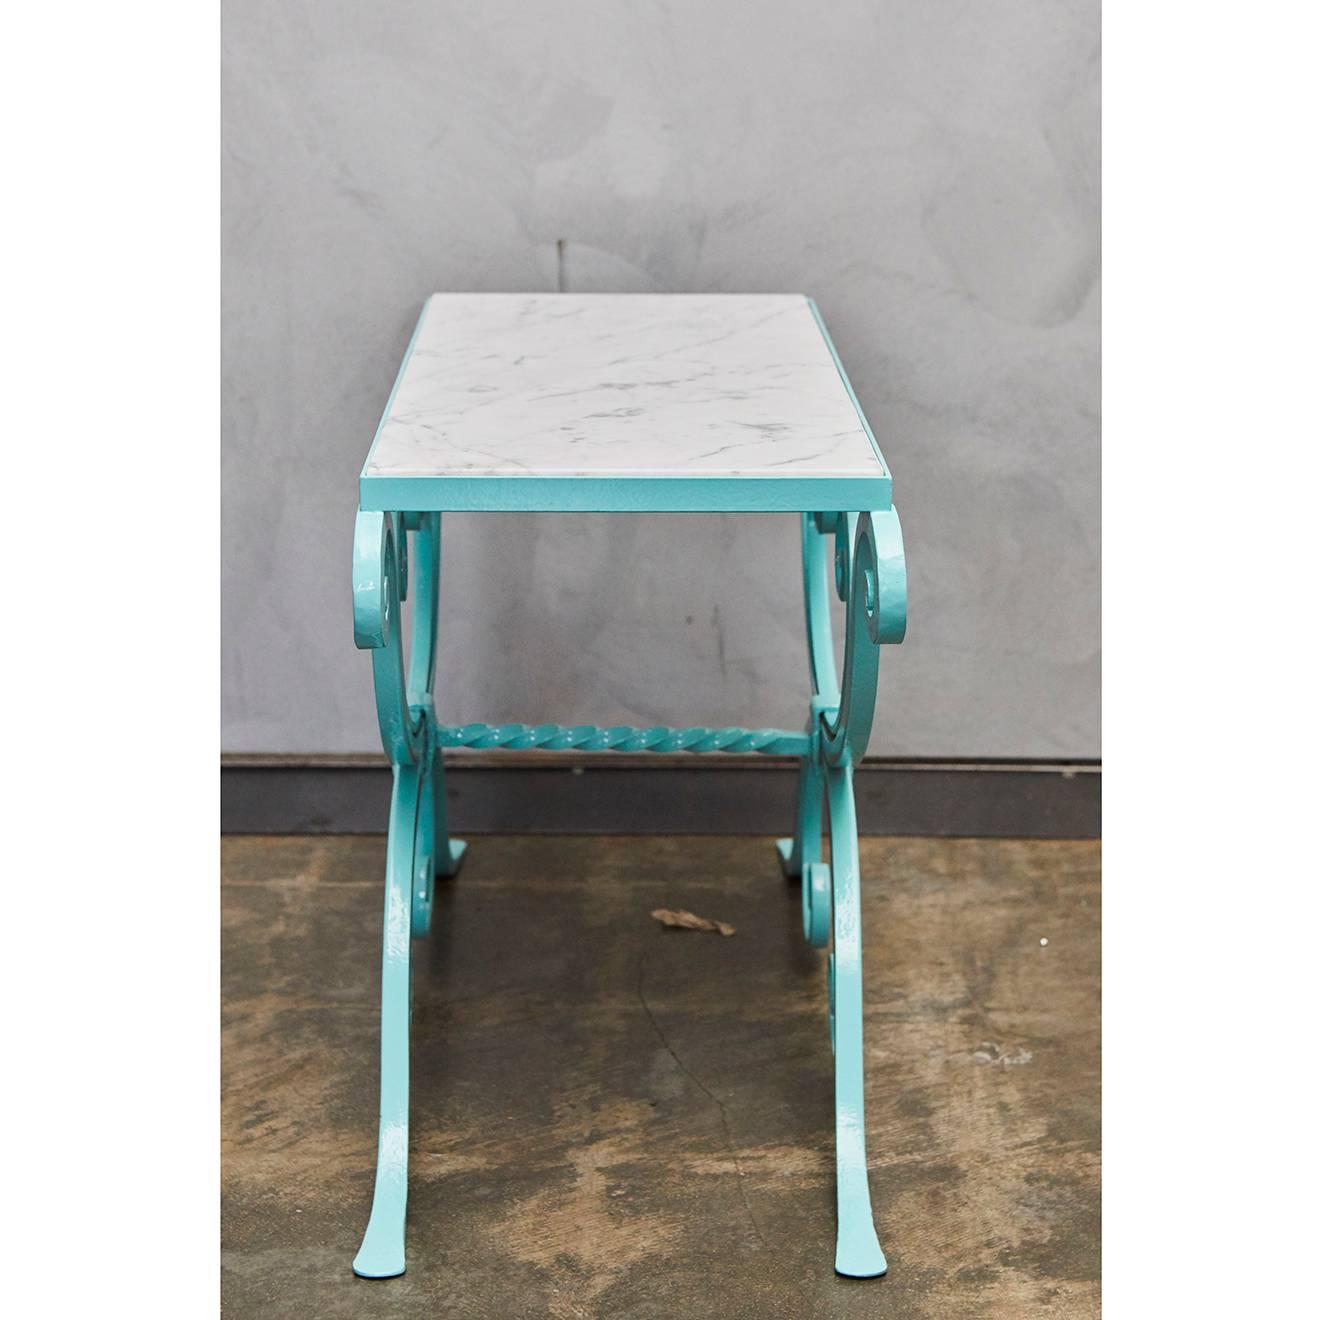 Small Powder coated Wrought Iron Table with Marble Top In Good Condition For Sale In Culver City, CA